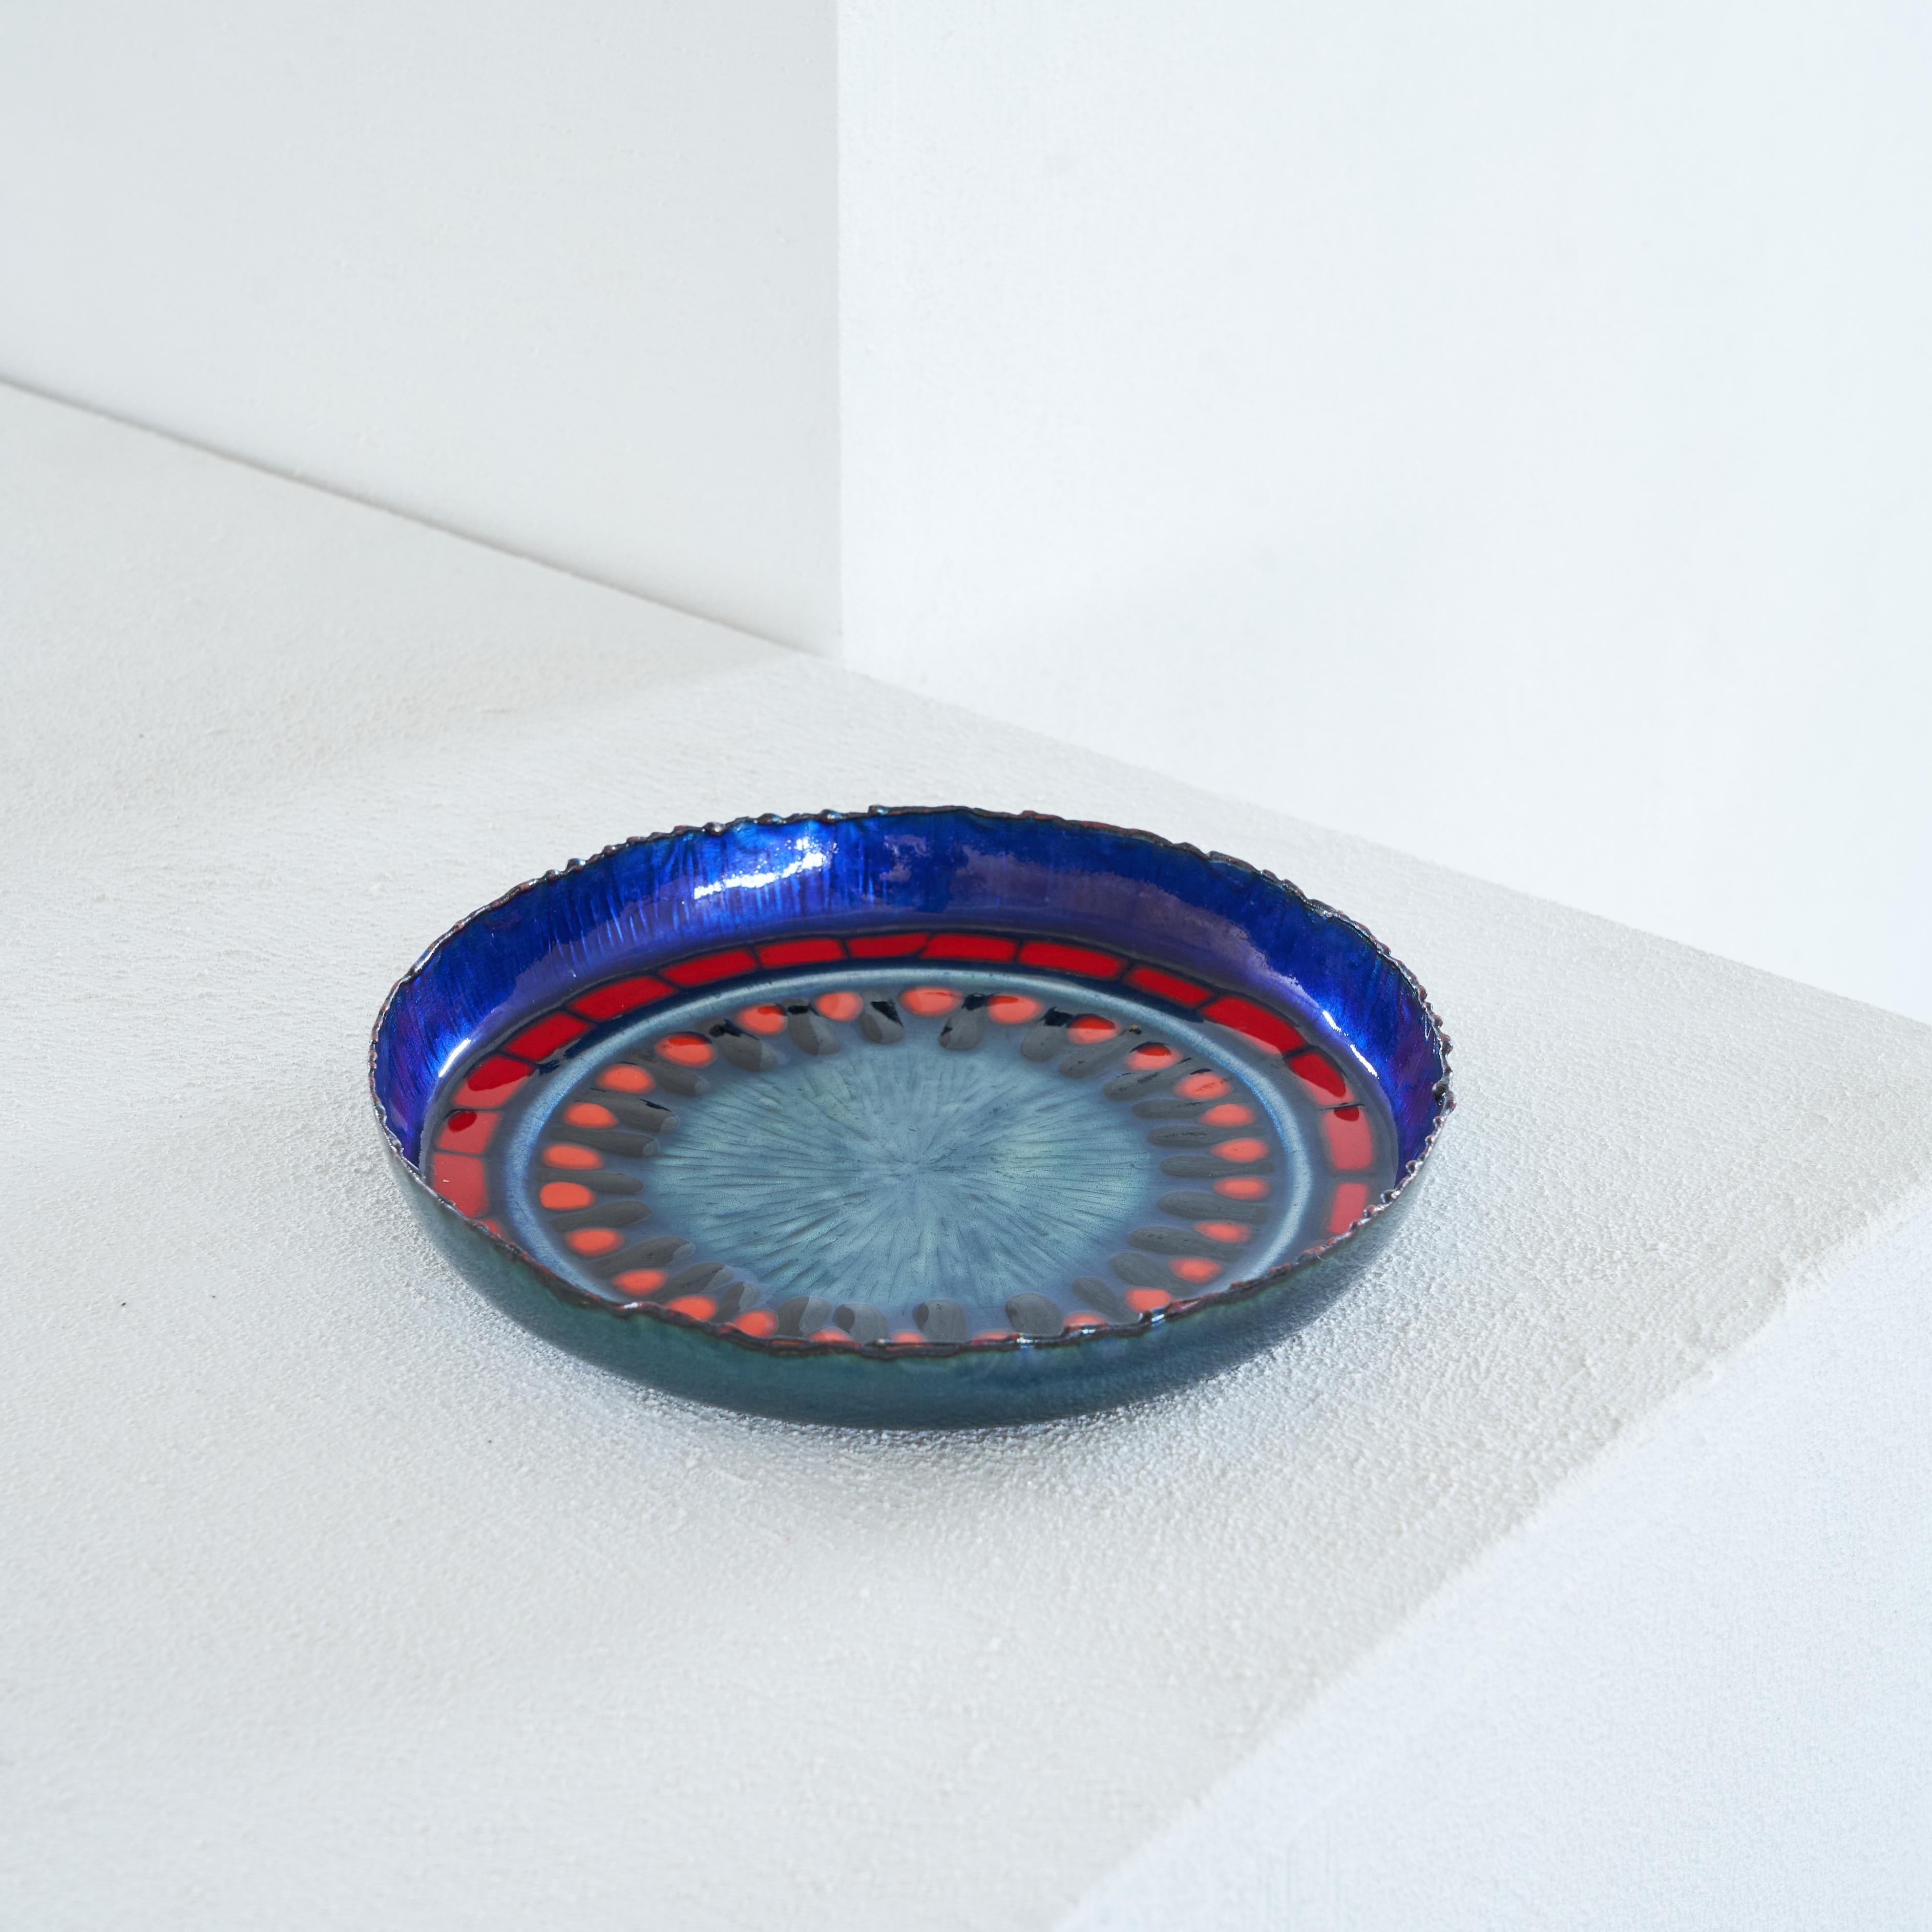 Midcentury Enamel Bowl 1960s.

Beautiful and colorful enameled bowl made in the middle of the 20th century. Great colors and execution. The distinction between the nice and lovely colors and the rough and sharp edges of the upper rim are a nice